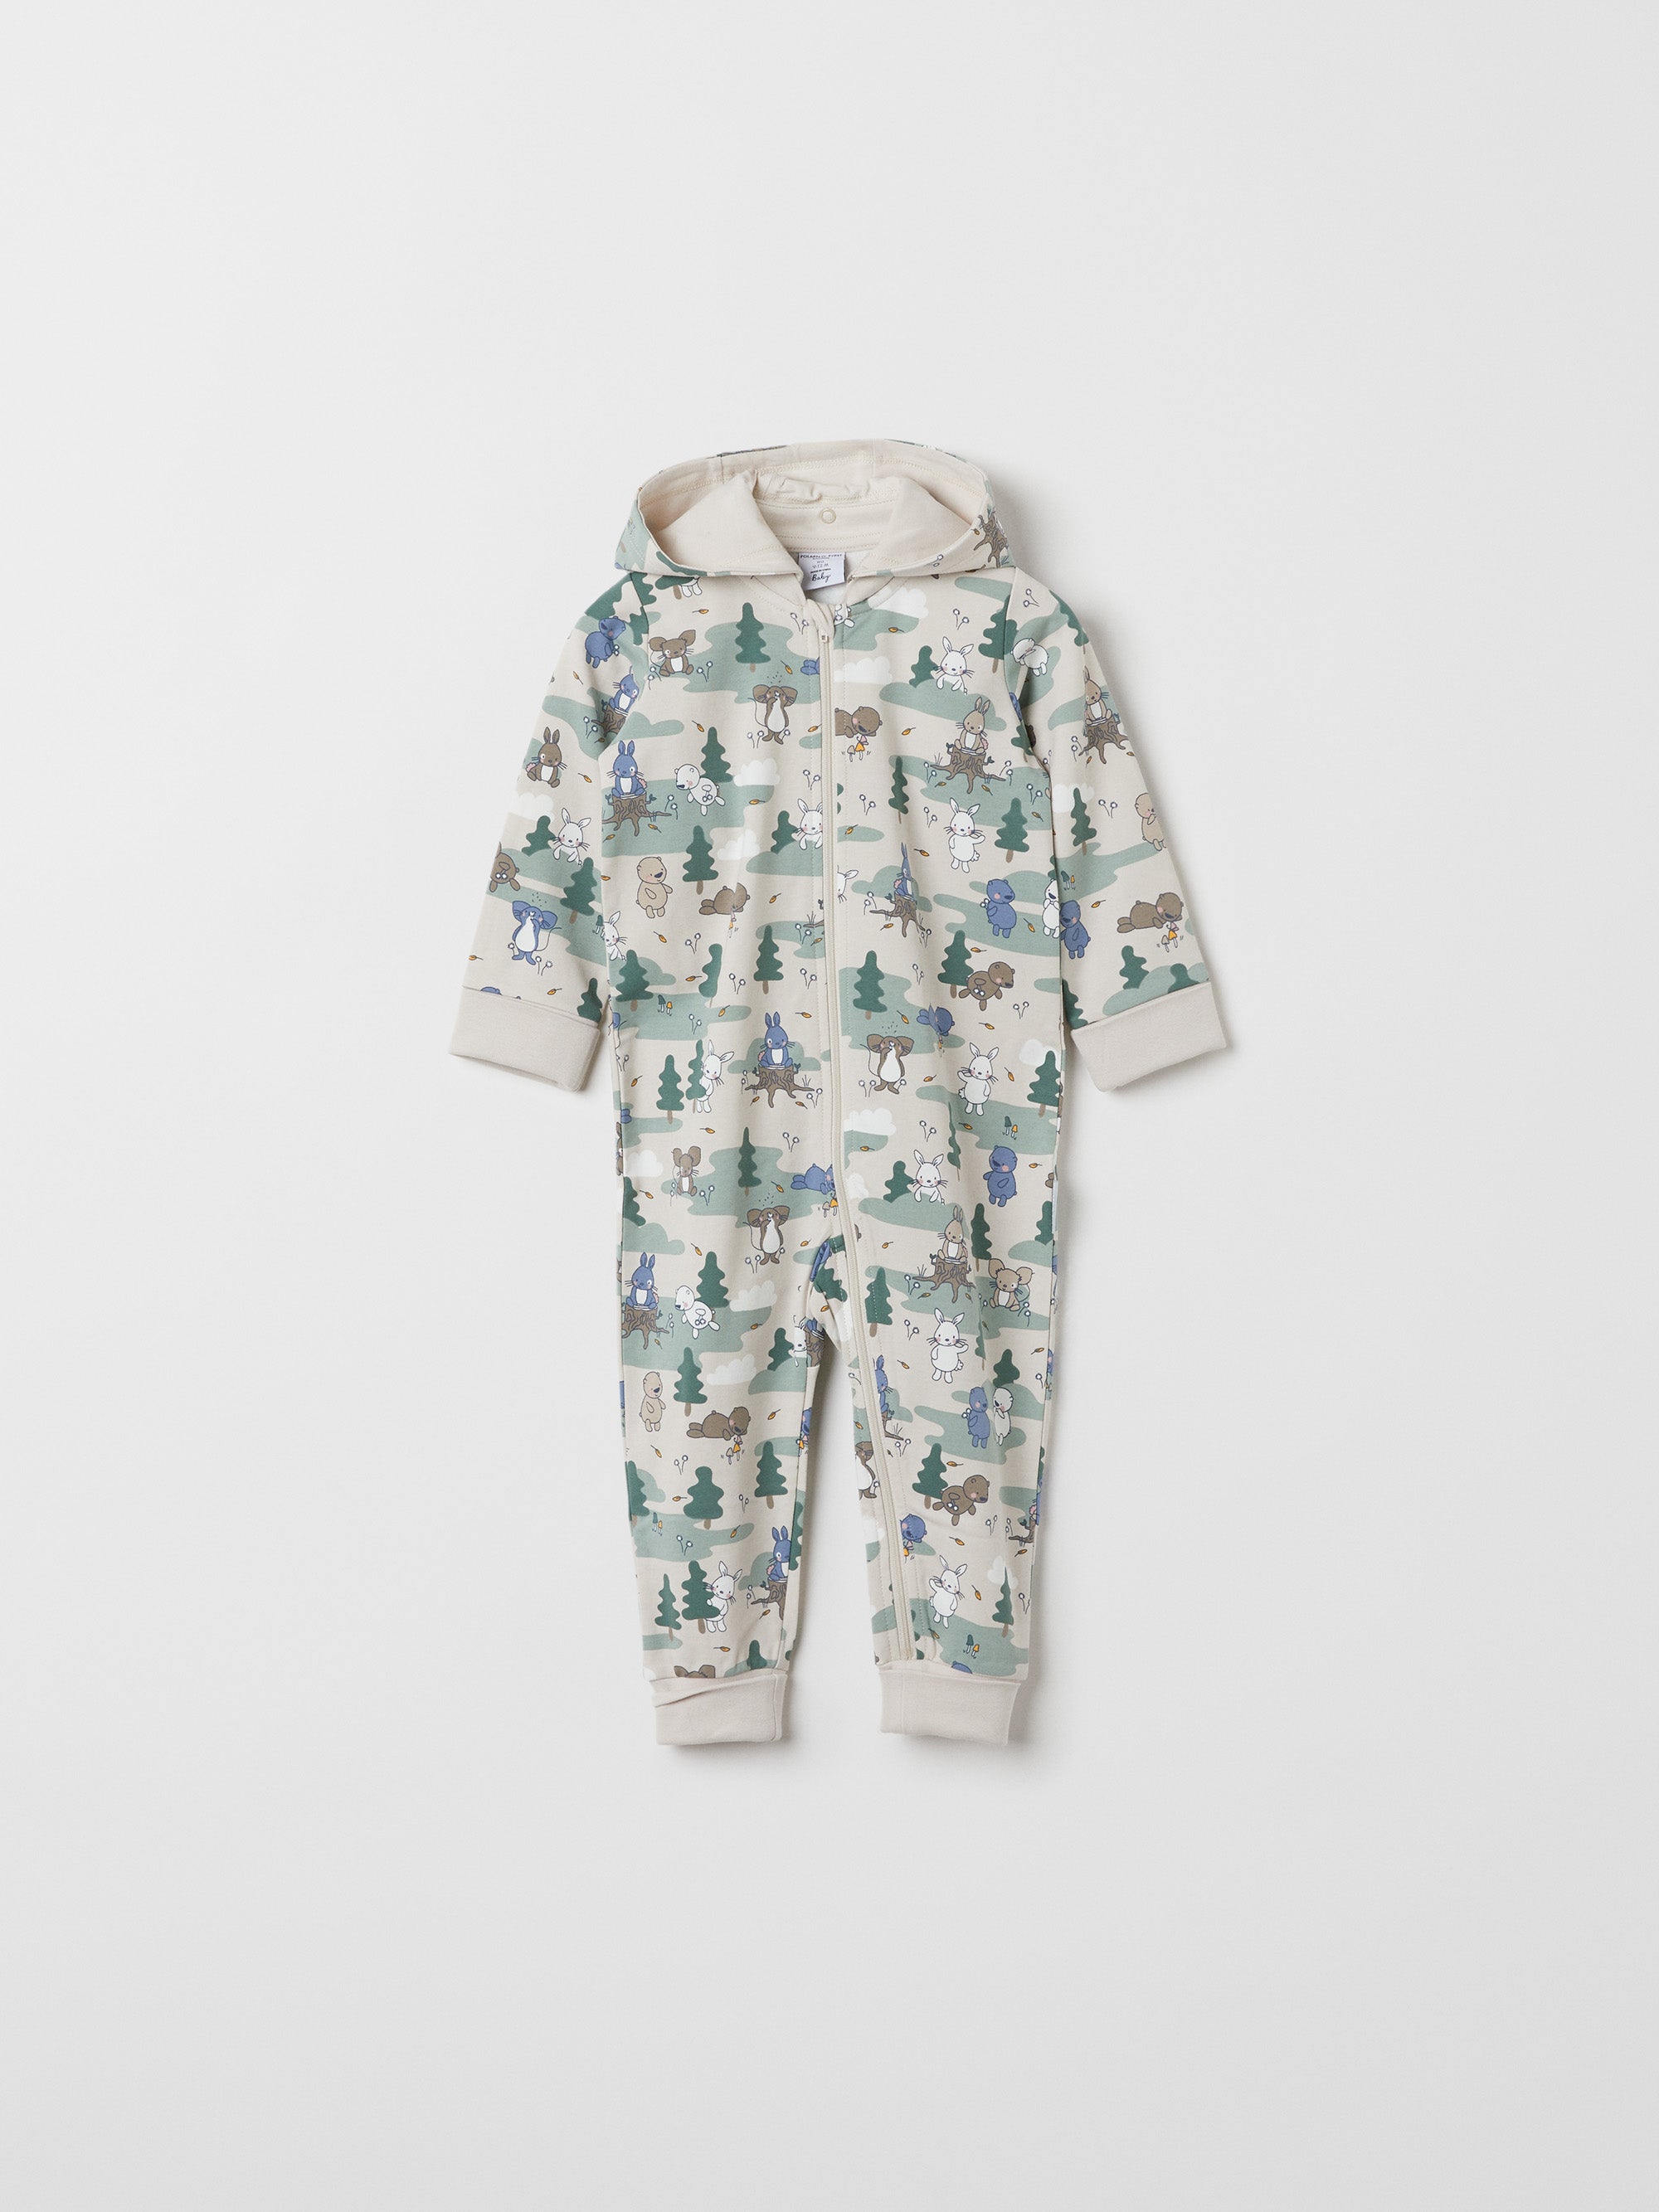 Forest Animal Print Baby All-in-one